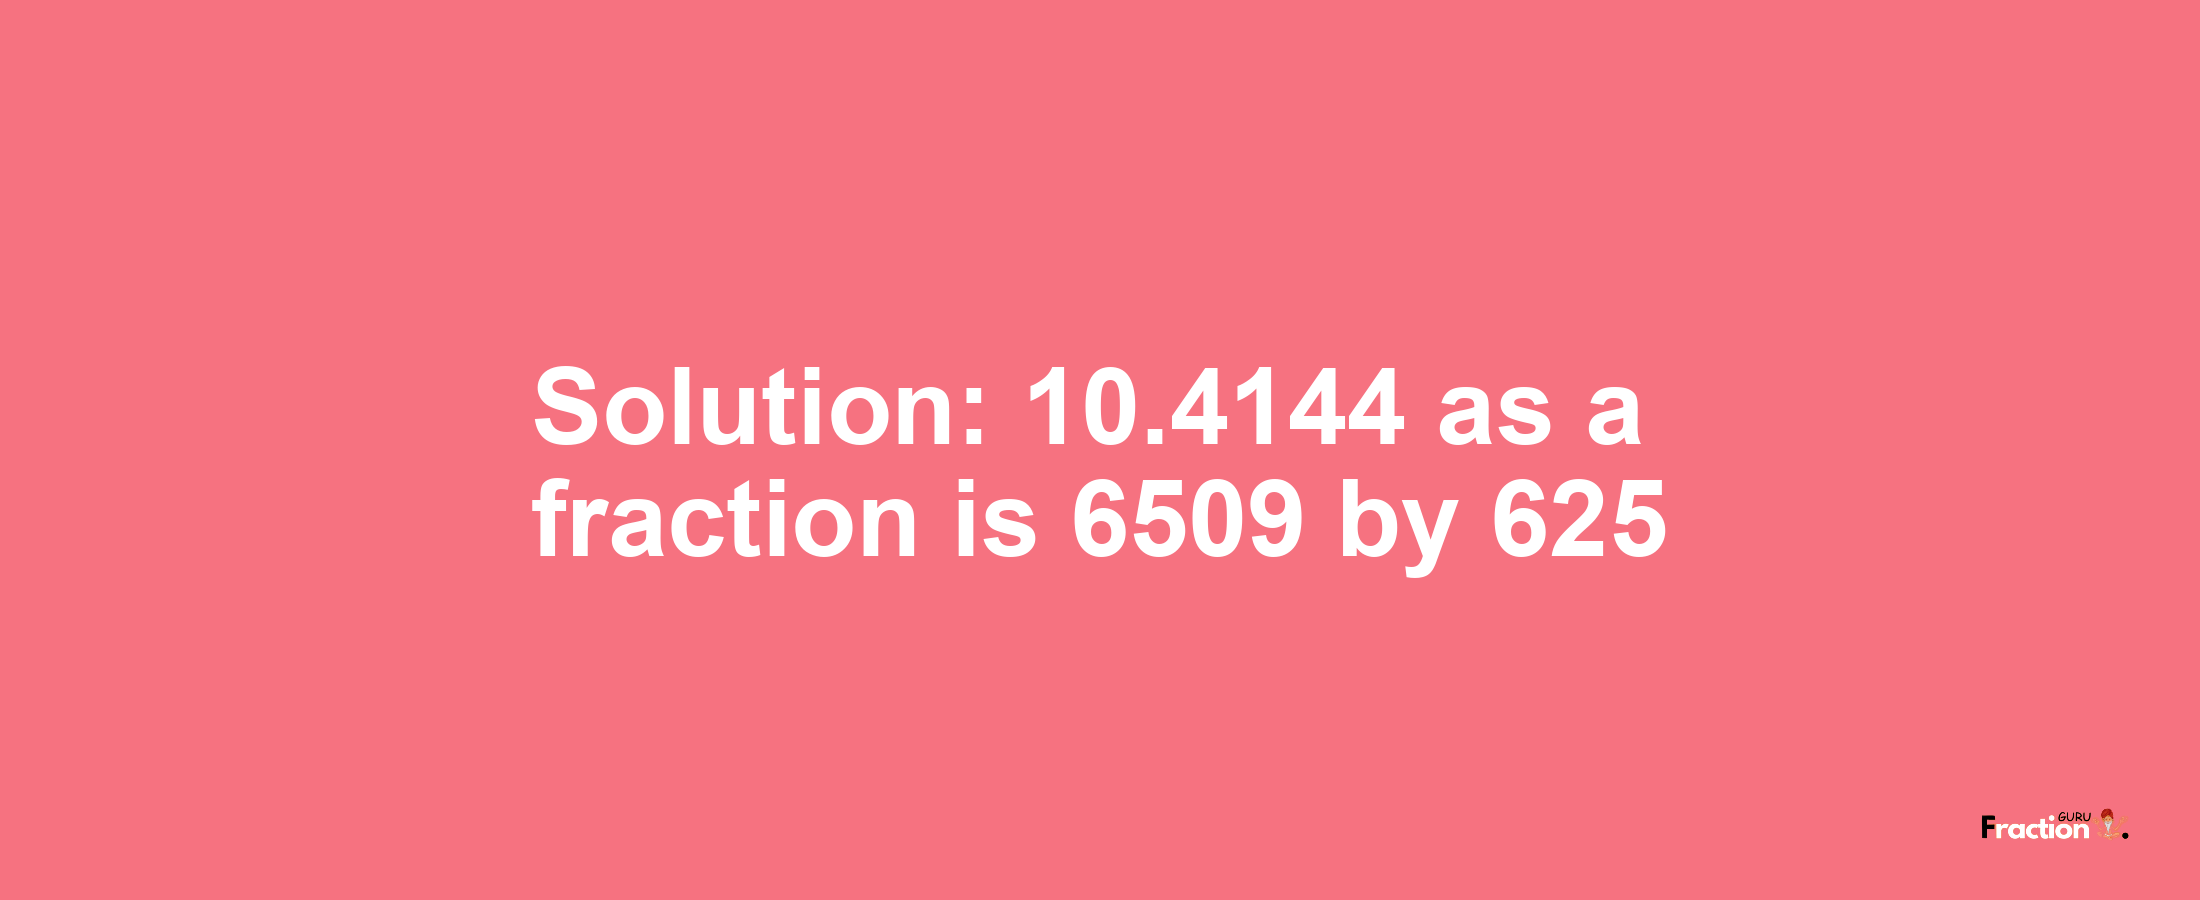 Solution:10.4144 as a fraction is 6509/625